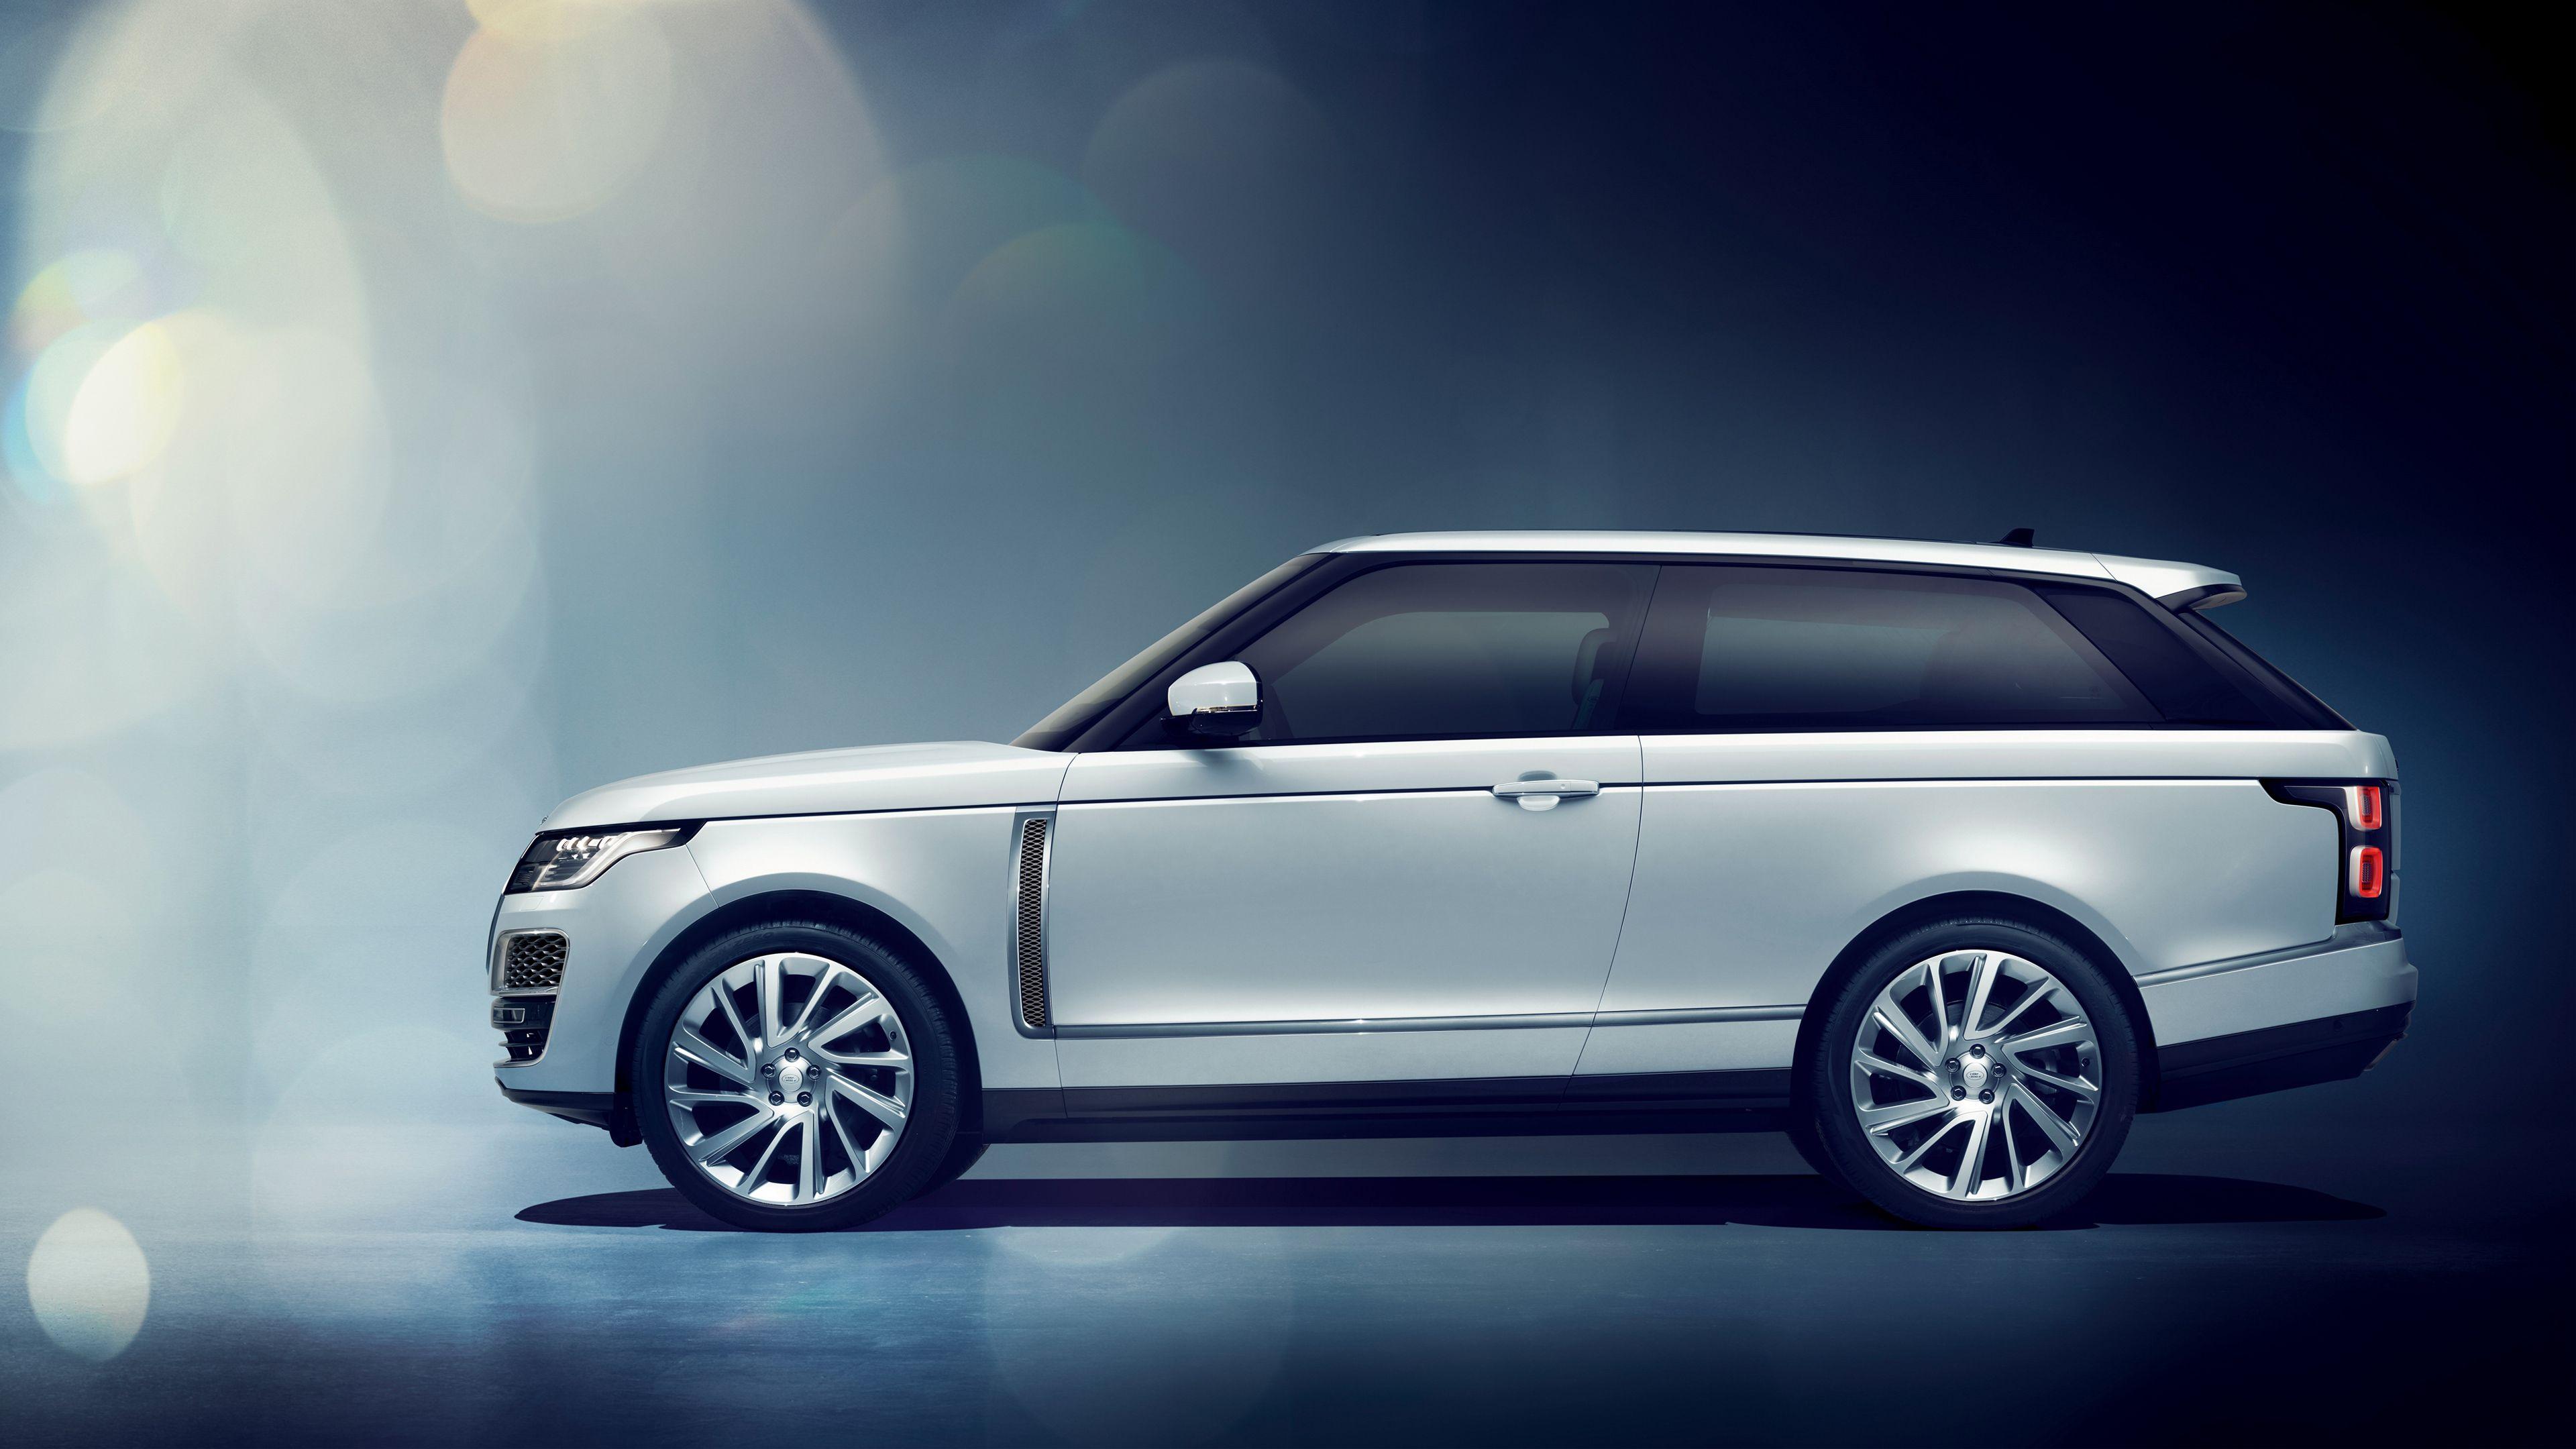 Range Rover Sv Coupe Wallpapers Wallpaper Cave Images, Photos, Reviews